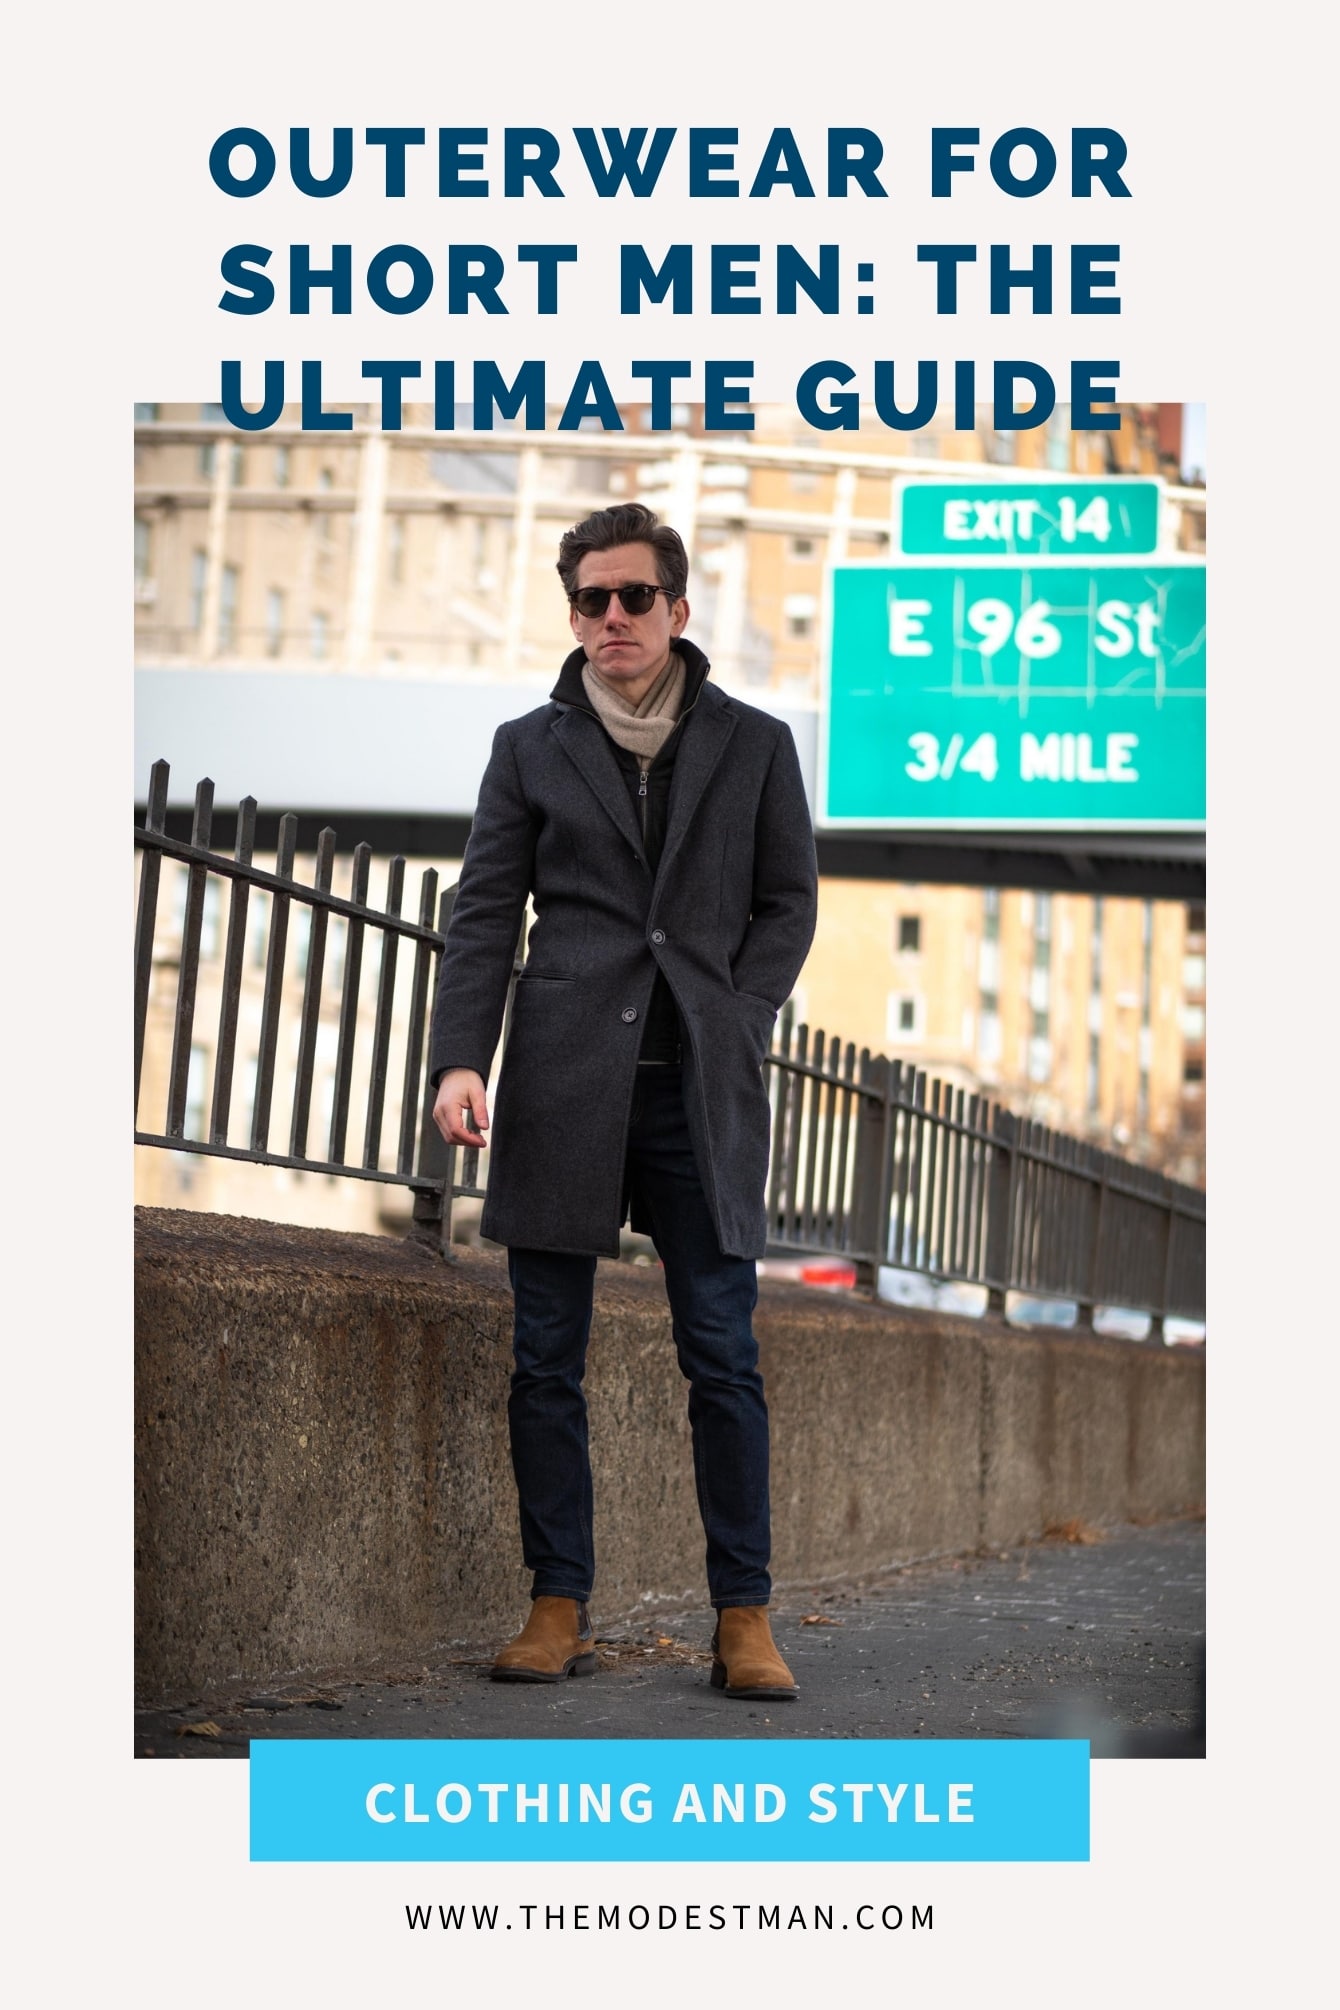 The Ultimate Guide to Style a Wool Coat